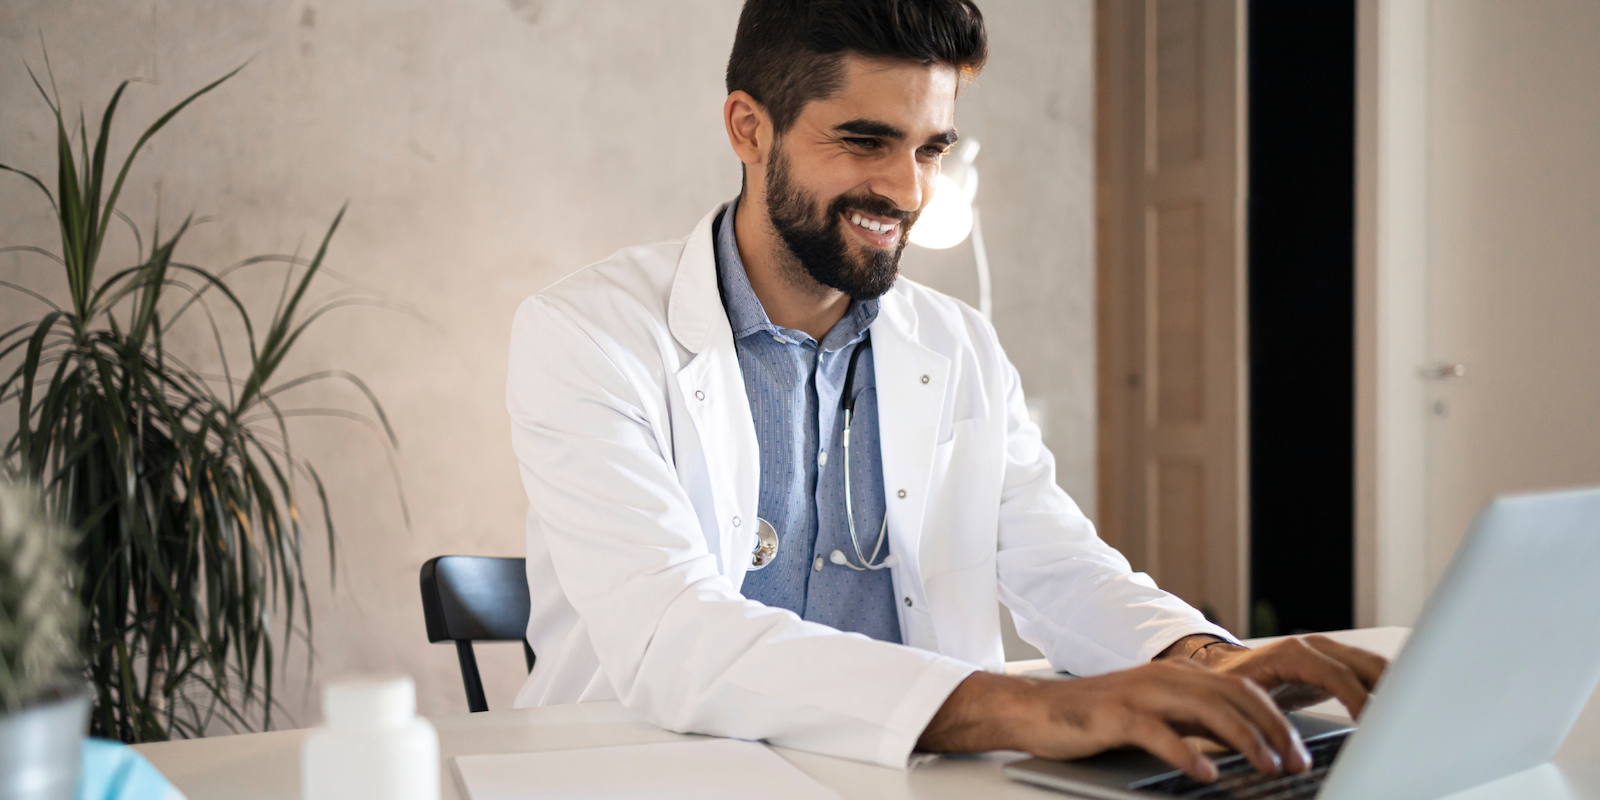 A male doctor with medium-toned skin and dark hair sits in a blue shirt and lab coat with a stethoscope around his neck, typing into a computer and smiling